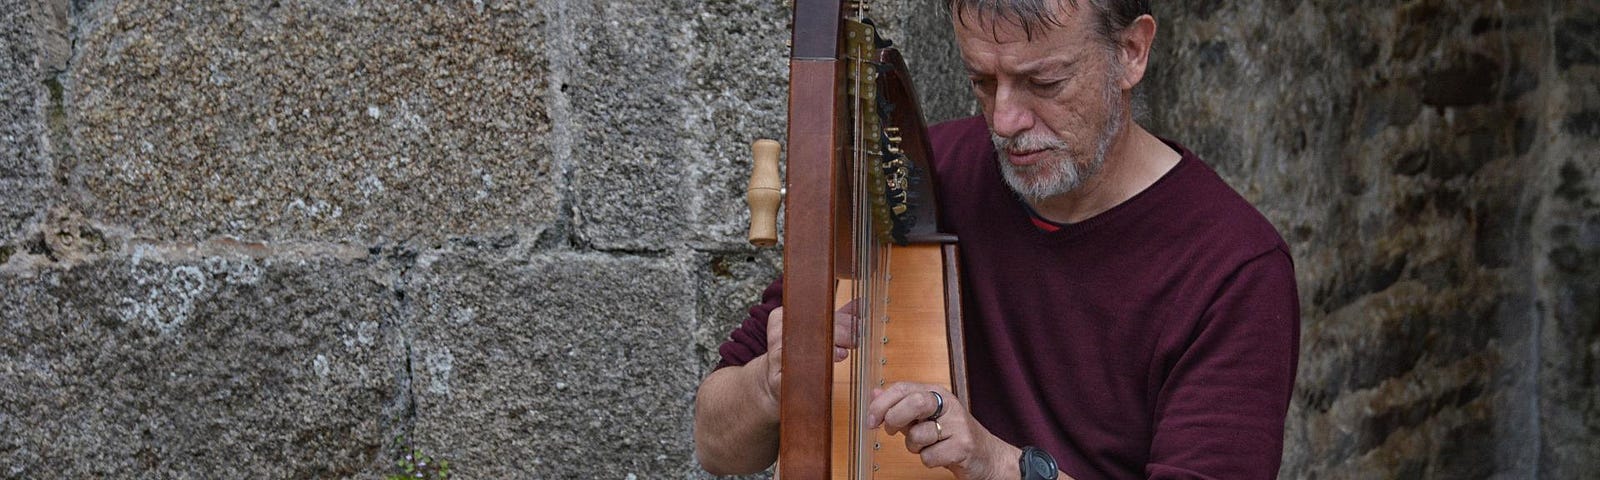 A man sits in front of a stone wall, playing a harp. He is wearing a maroon shirt and grey pants. He has a grey beard.